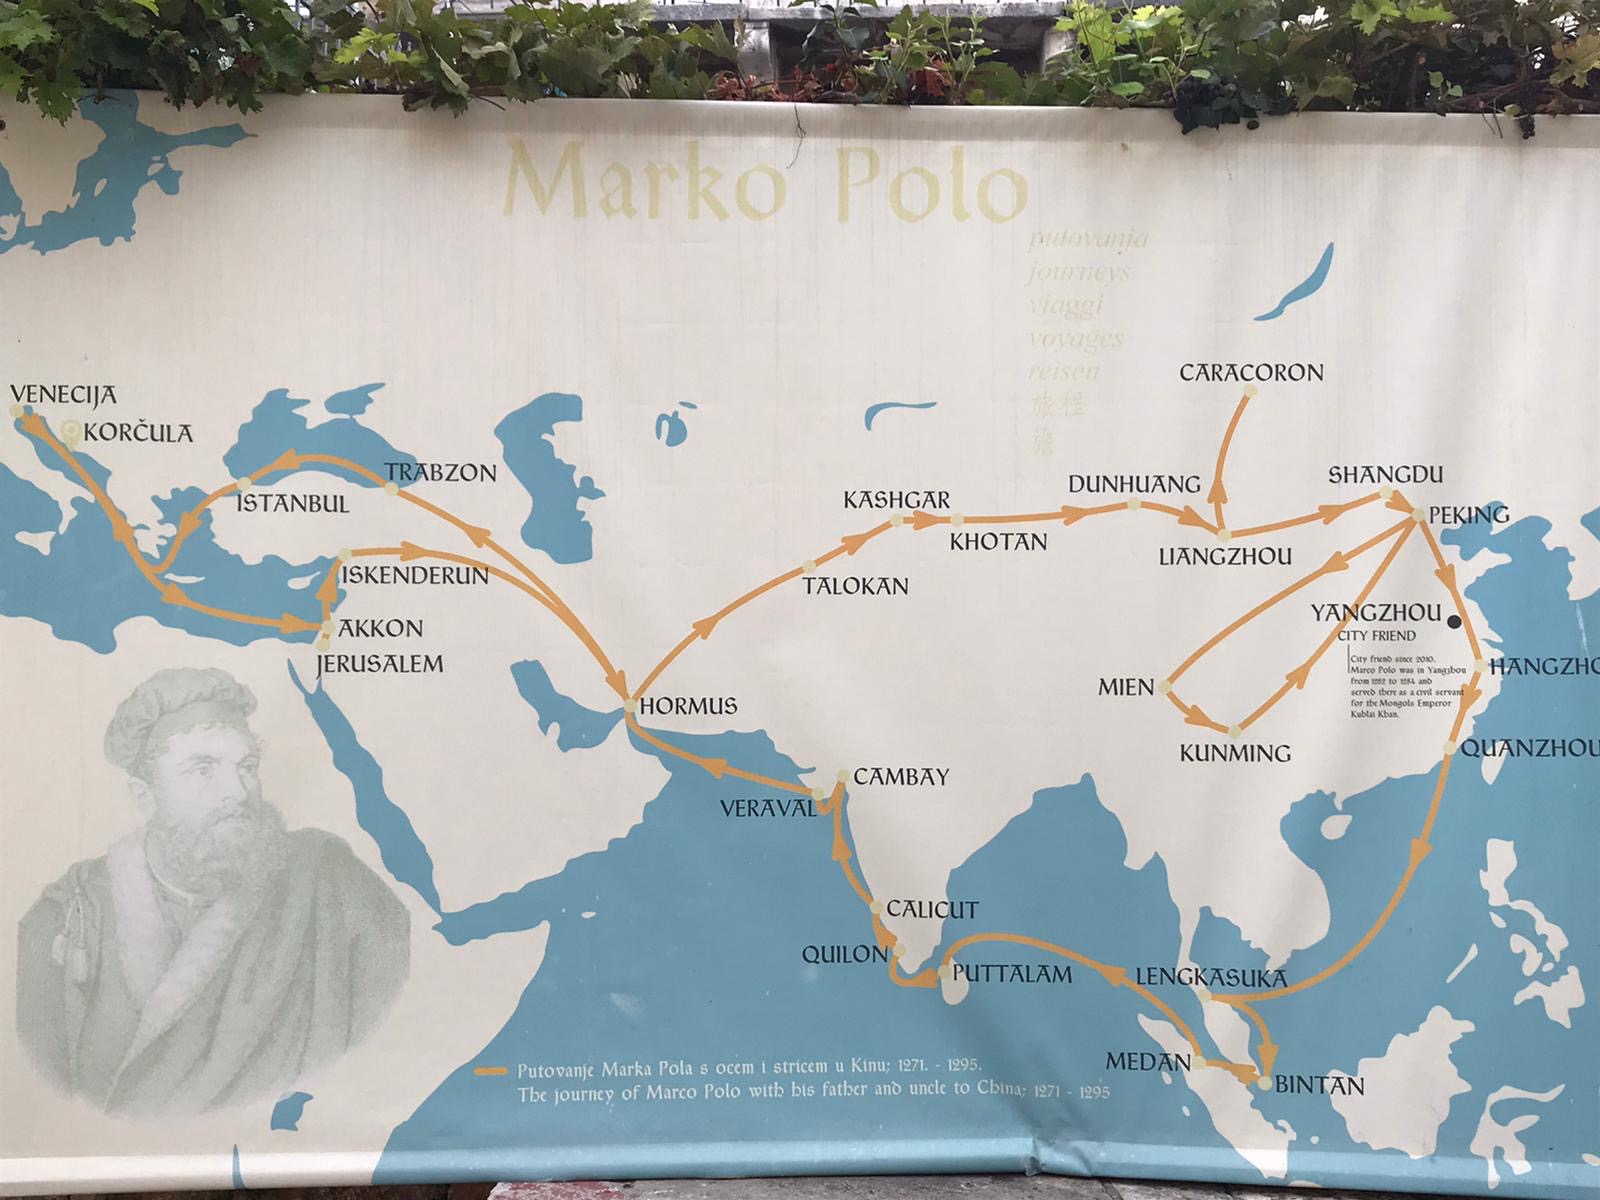 Marco Polo travels